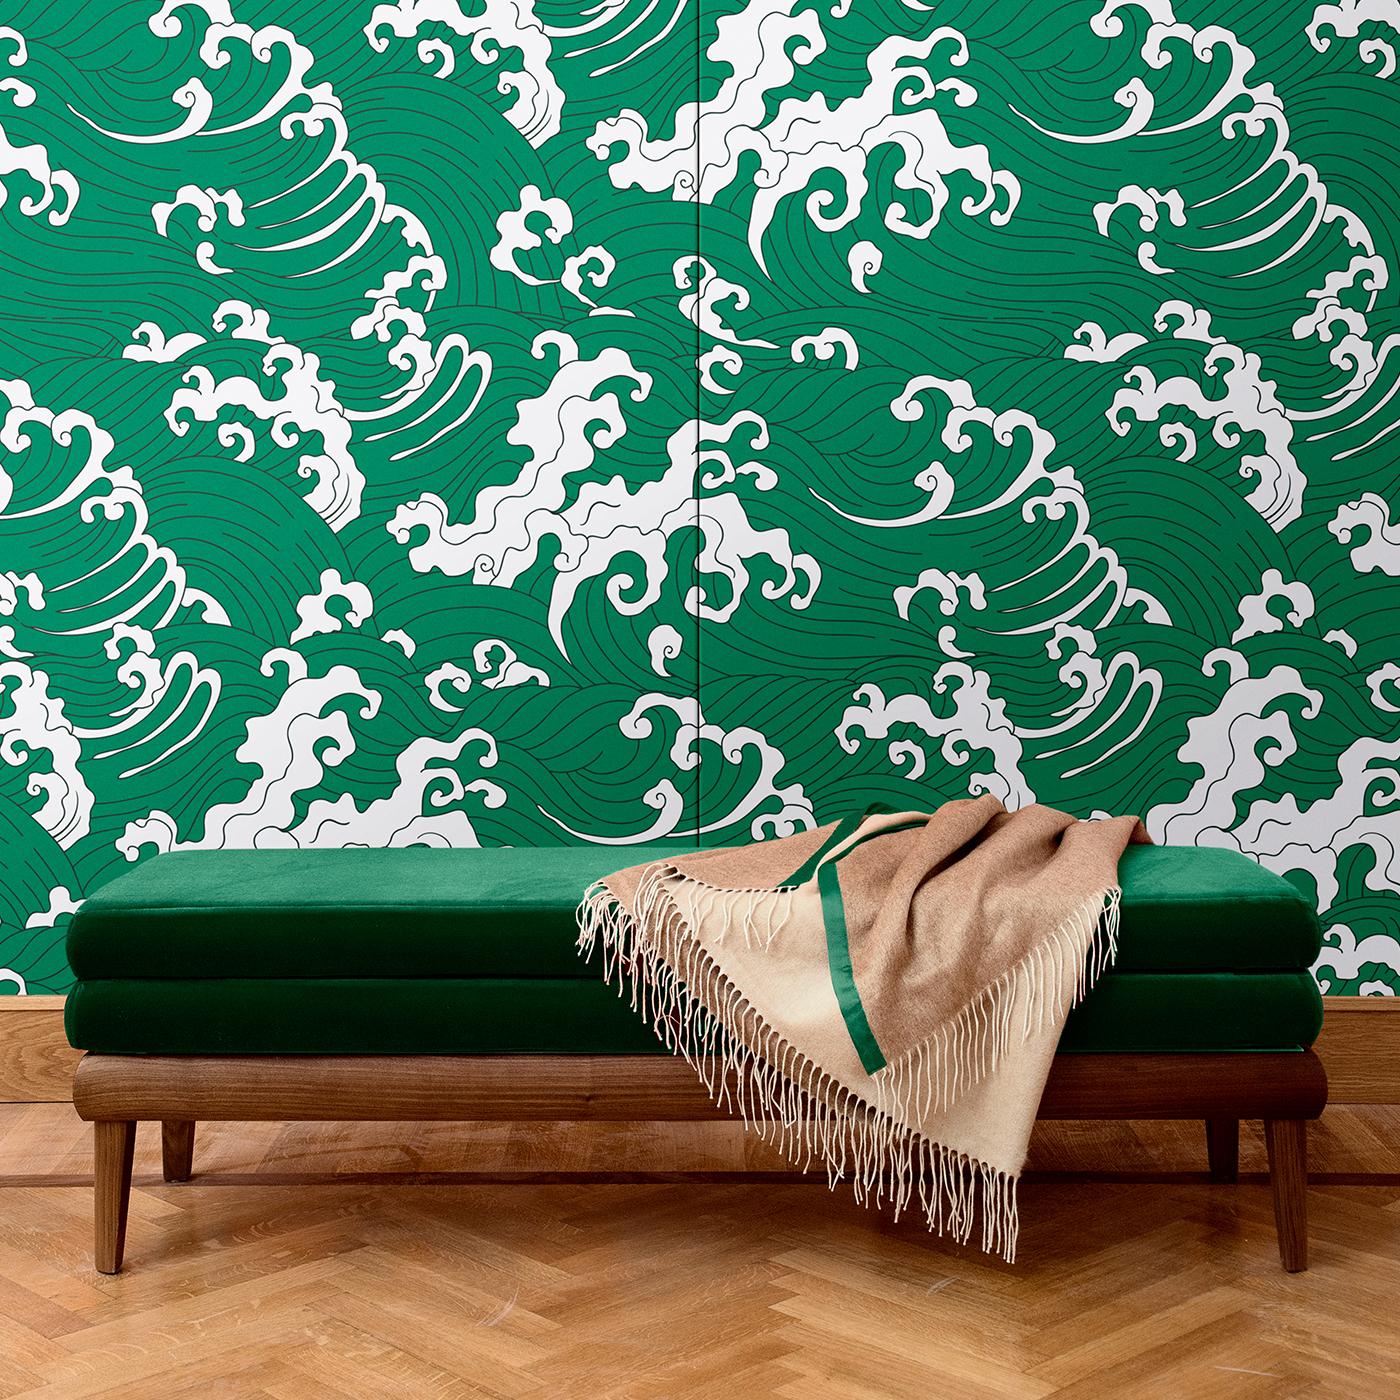 This elegant wall covering was crafted of silk and cotton and is part of the Waves collection. In it, inspired by the iconic marine scenes depicted in traditional Japanese art, a tempestuous sea in green is punctuated by white foam, creating a sense